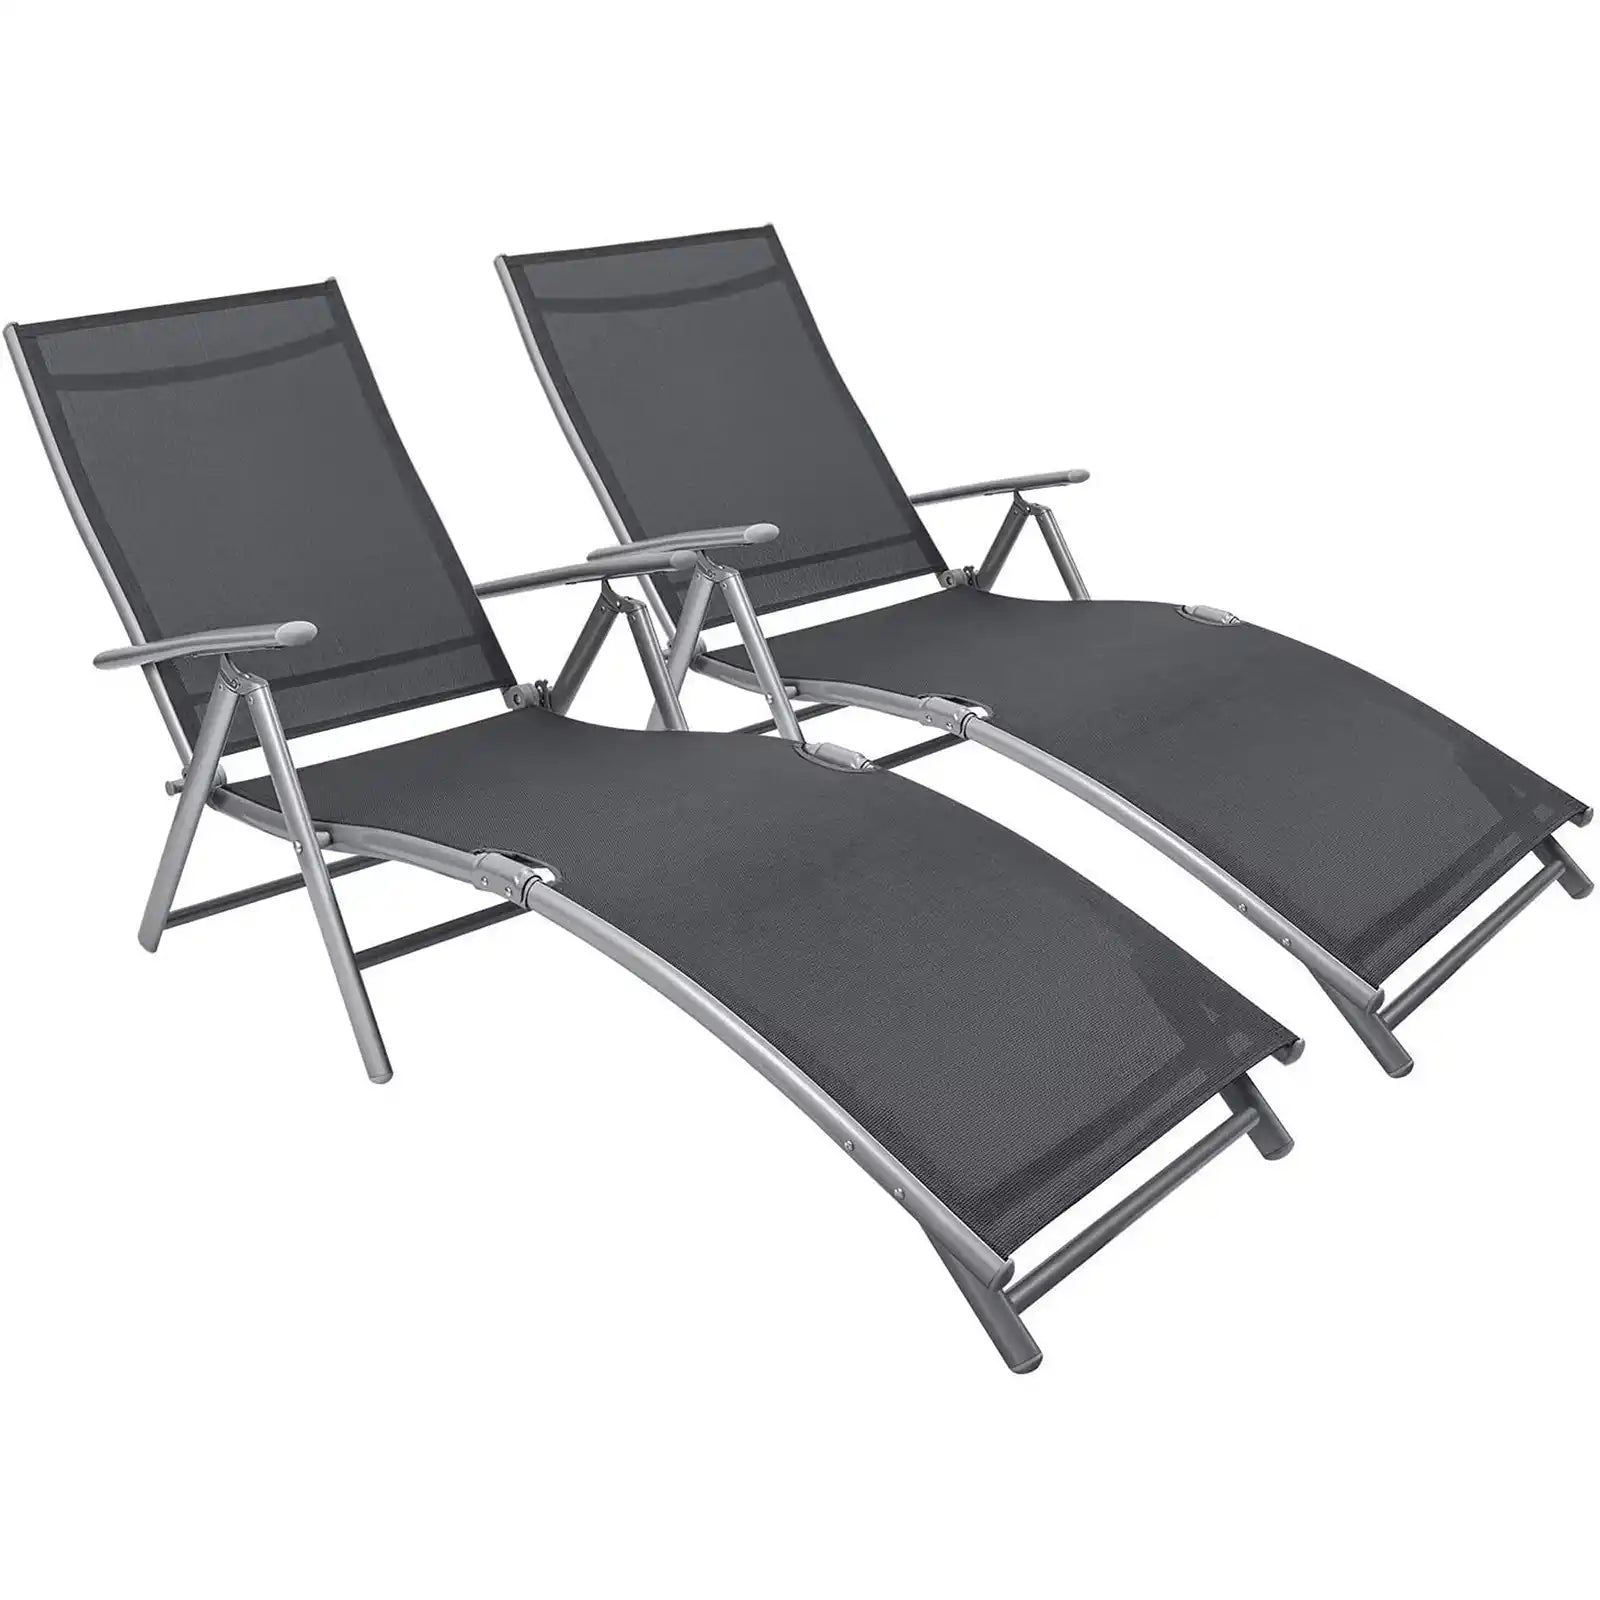 Patio Adjustable Chaise Lounge for Outdoor and Pool Side, Folding Recliners, Set of 2